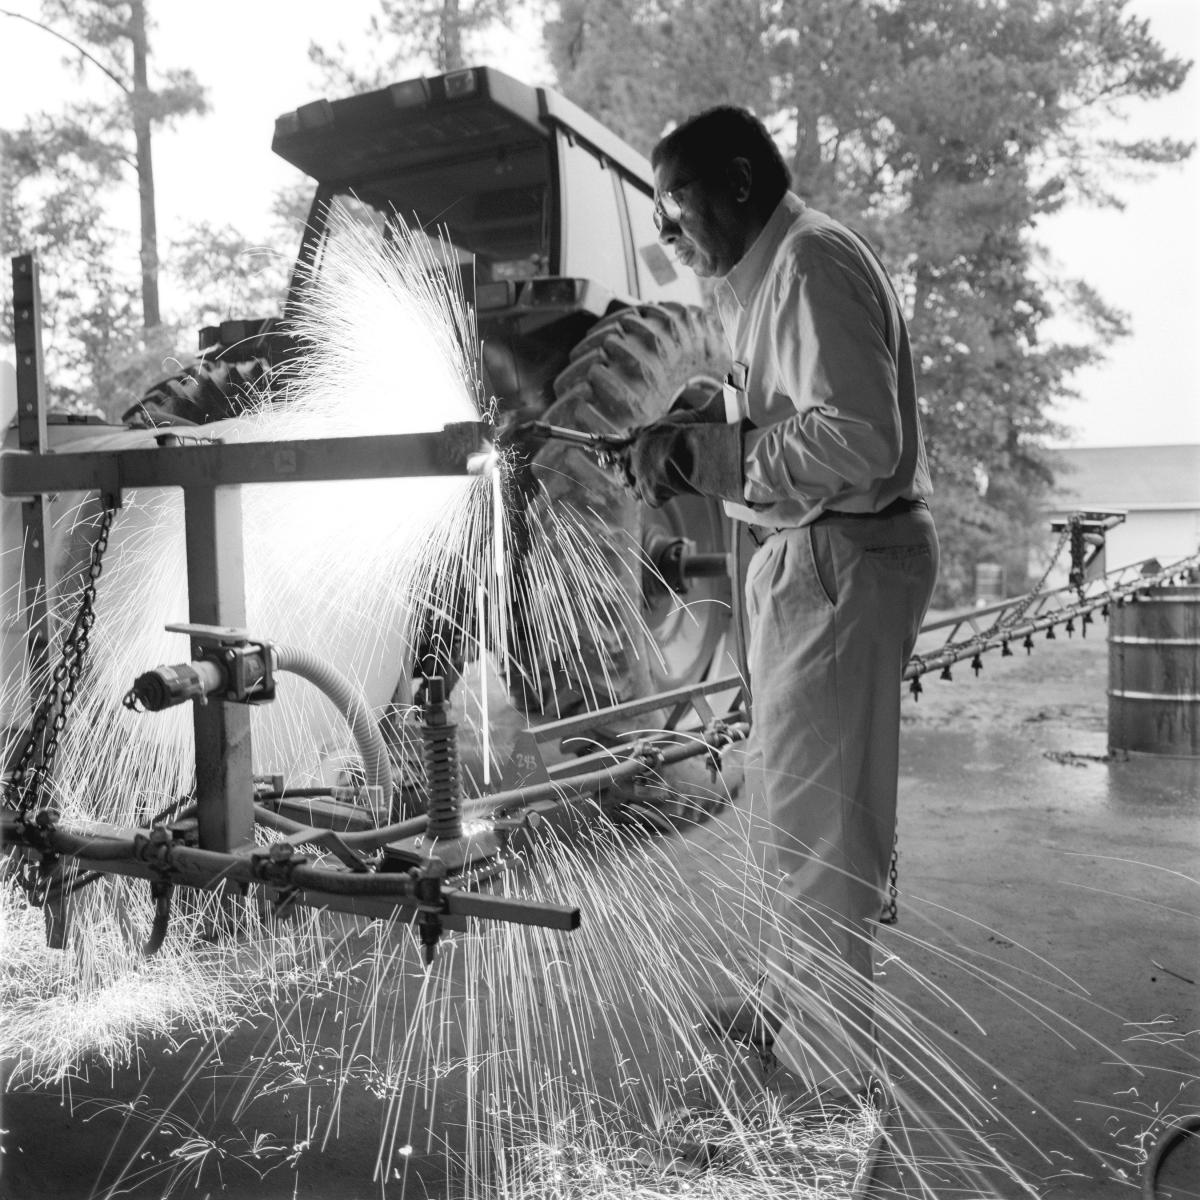 <p><center>Bladen County, North Carolina:</center></p>
After designing a modification to convert his four-row sprayer to a machine capable to treating six rows at a time, Wright finishes some welding. " This modification will allow fewer trips through the field, cutting fuel costs and time in the field."</p> : Images : AMERICAN BLACK FARMERS PROJECT - John Ficara